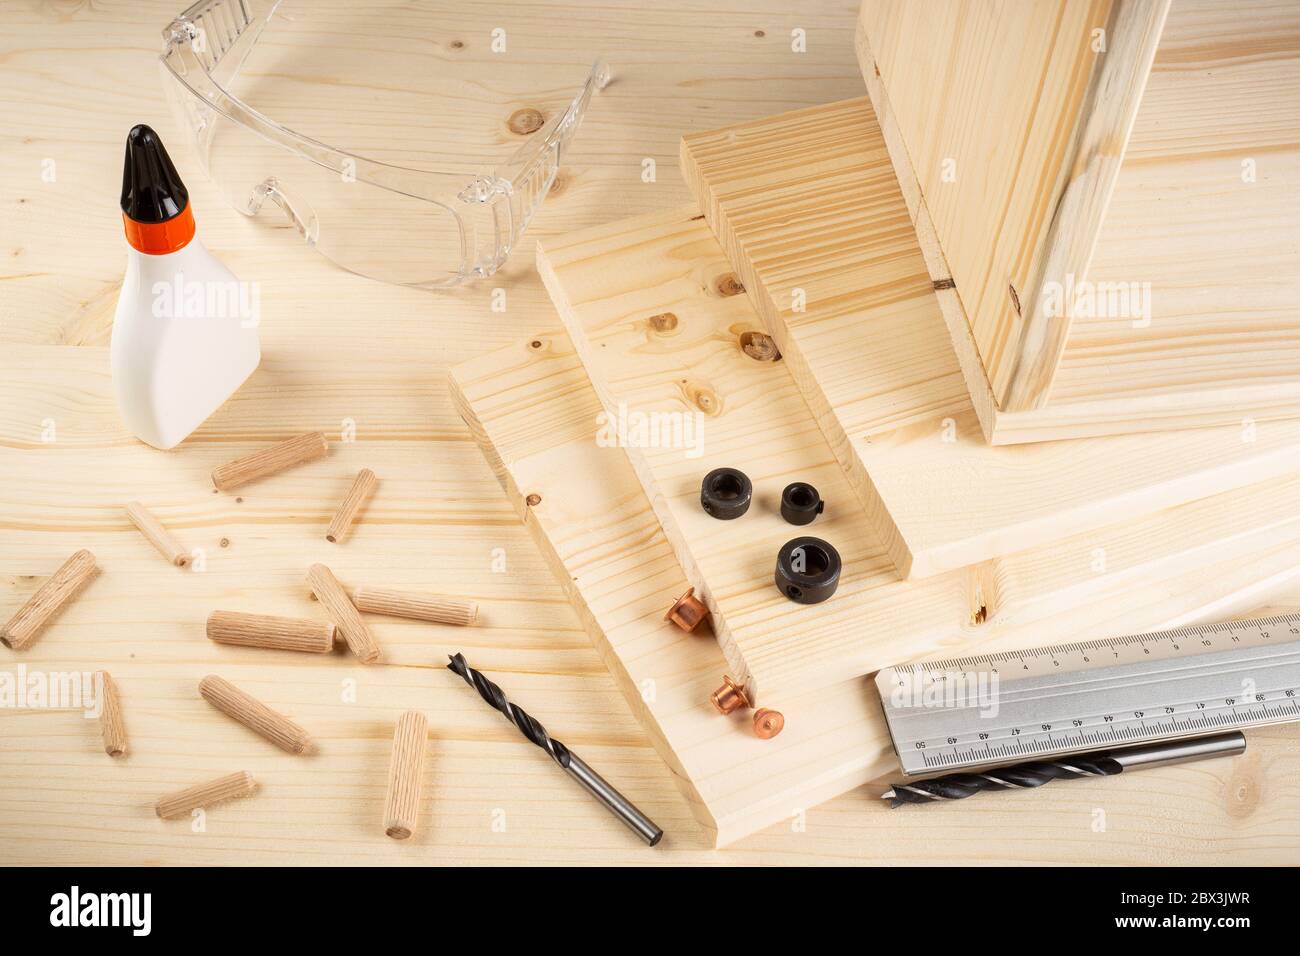 wooden dowel joint pins drill glue wood planks safety glasses and tools on spruce background. Carpenter industry funiture making concept. Stock Photo